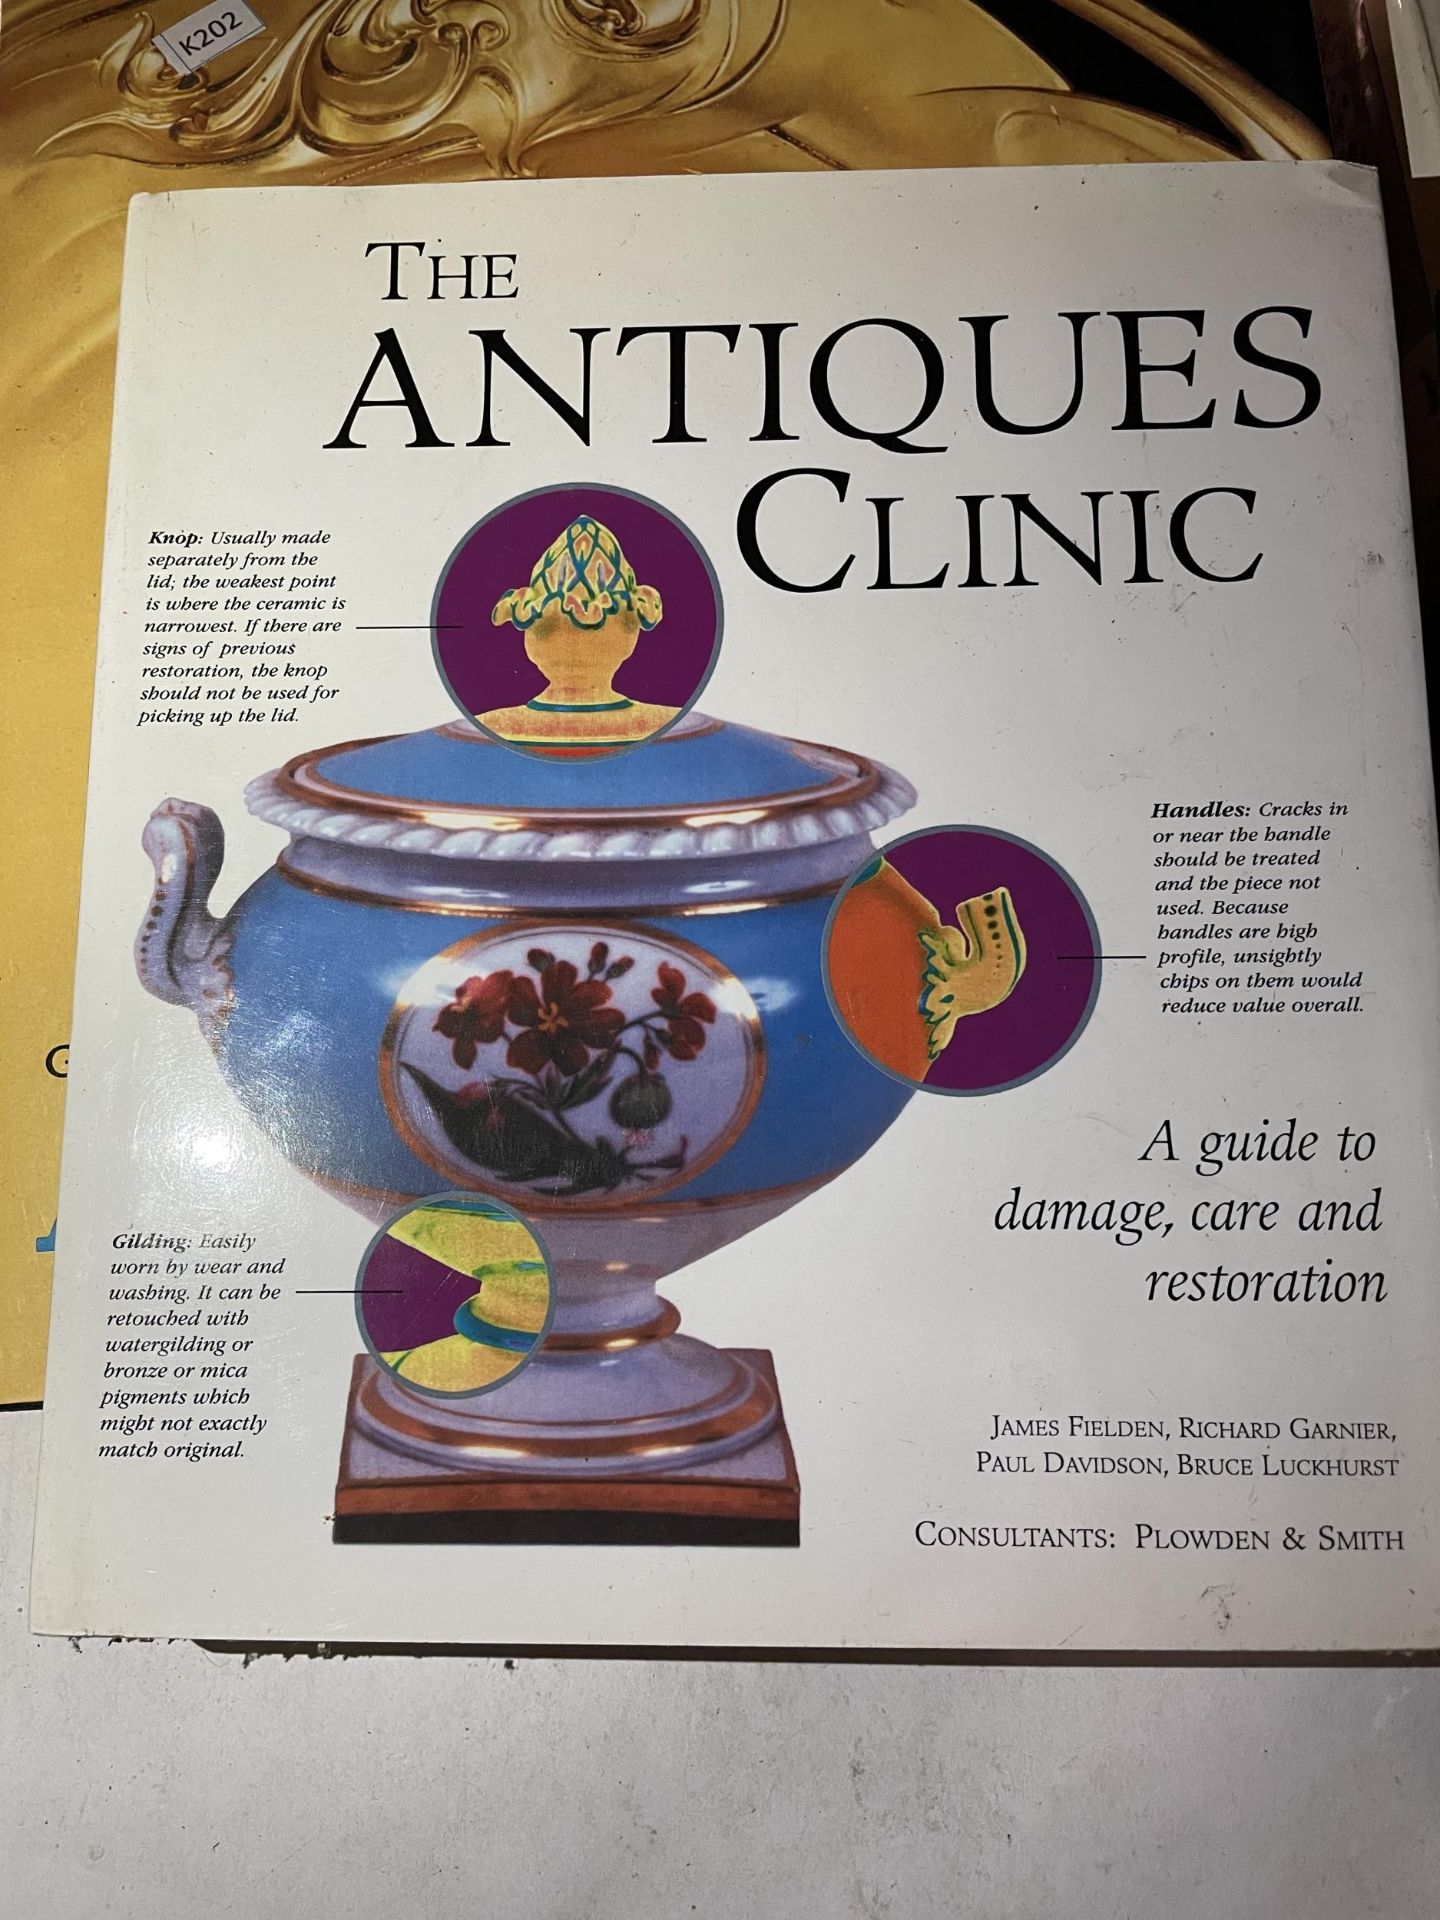 VARIOUS HARDBACK REFERENCE BOOKS RELATING TO COLLECTING TO INCLUDE GLASS, CARNIVAL GLASS, SILVER, - Image 3 of 5